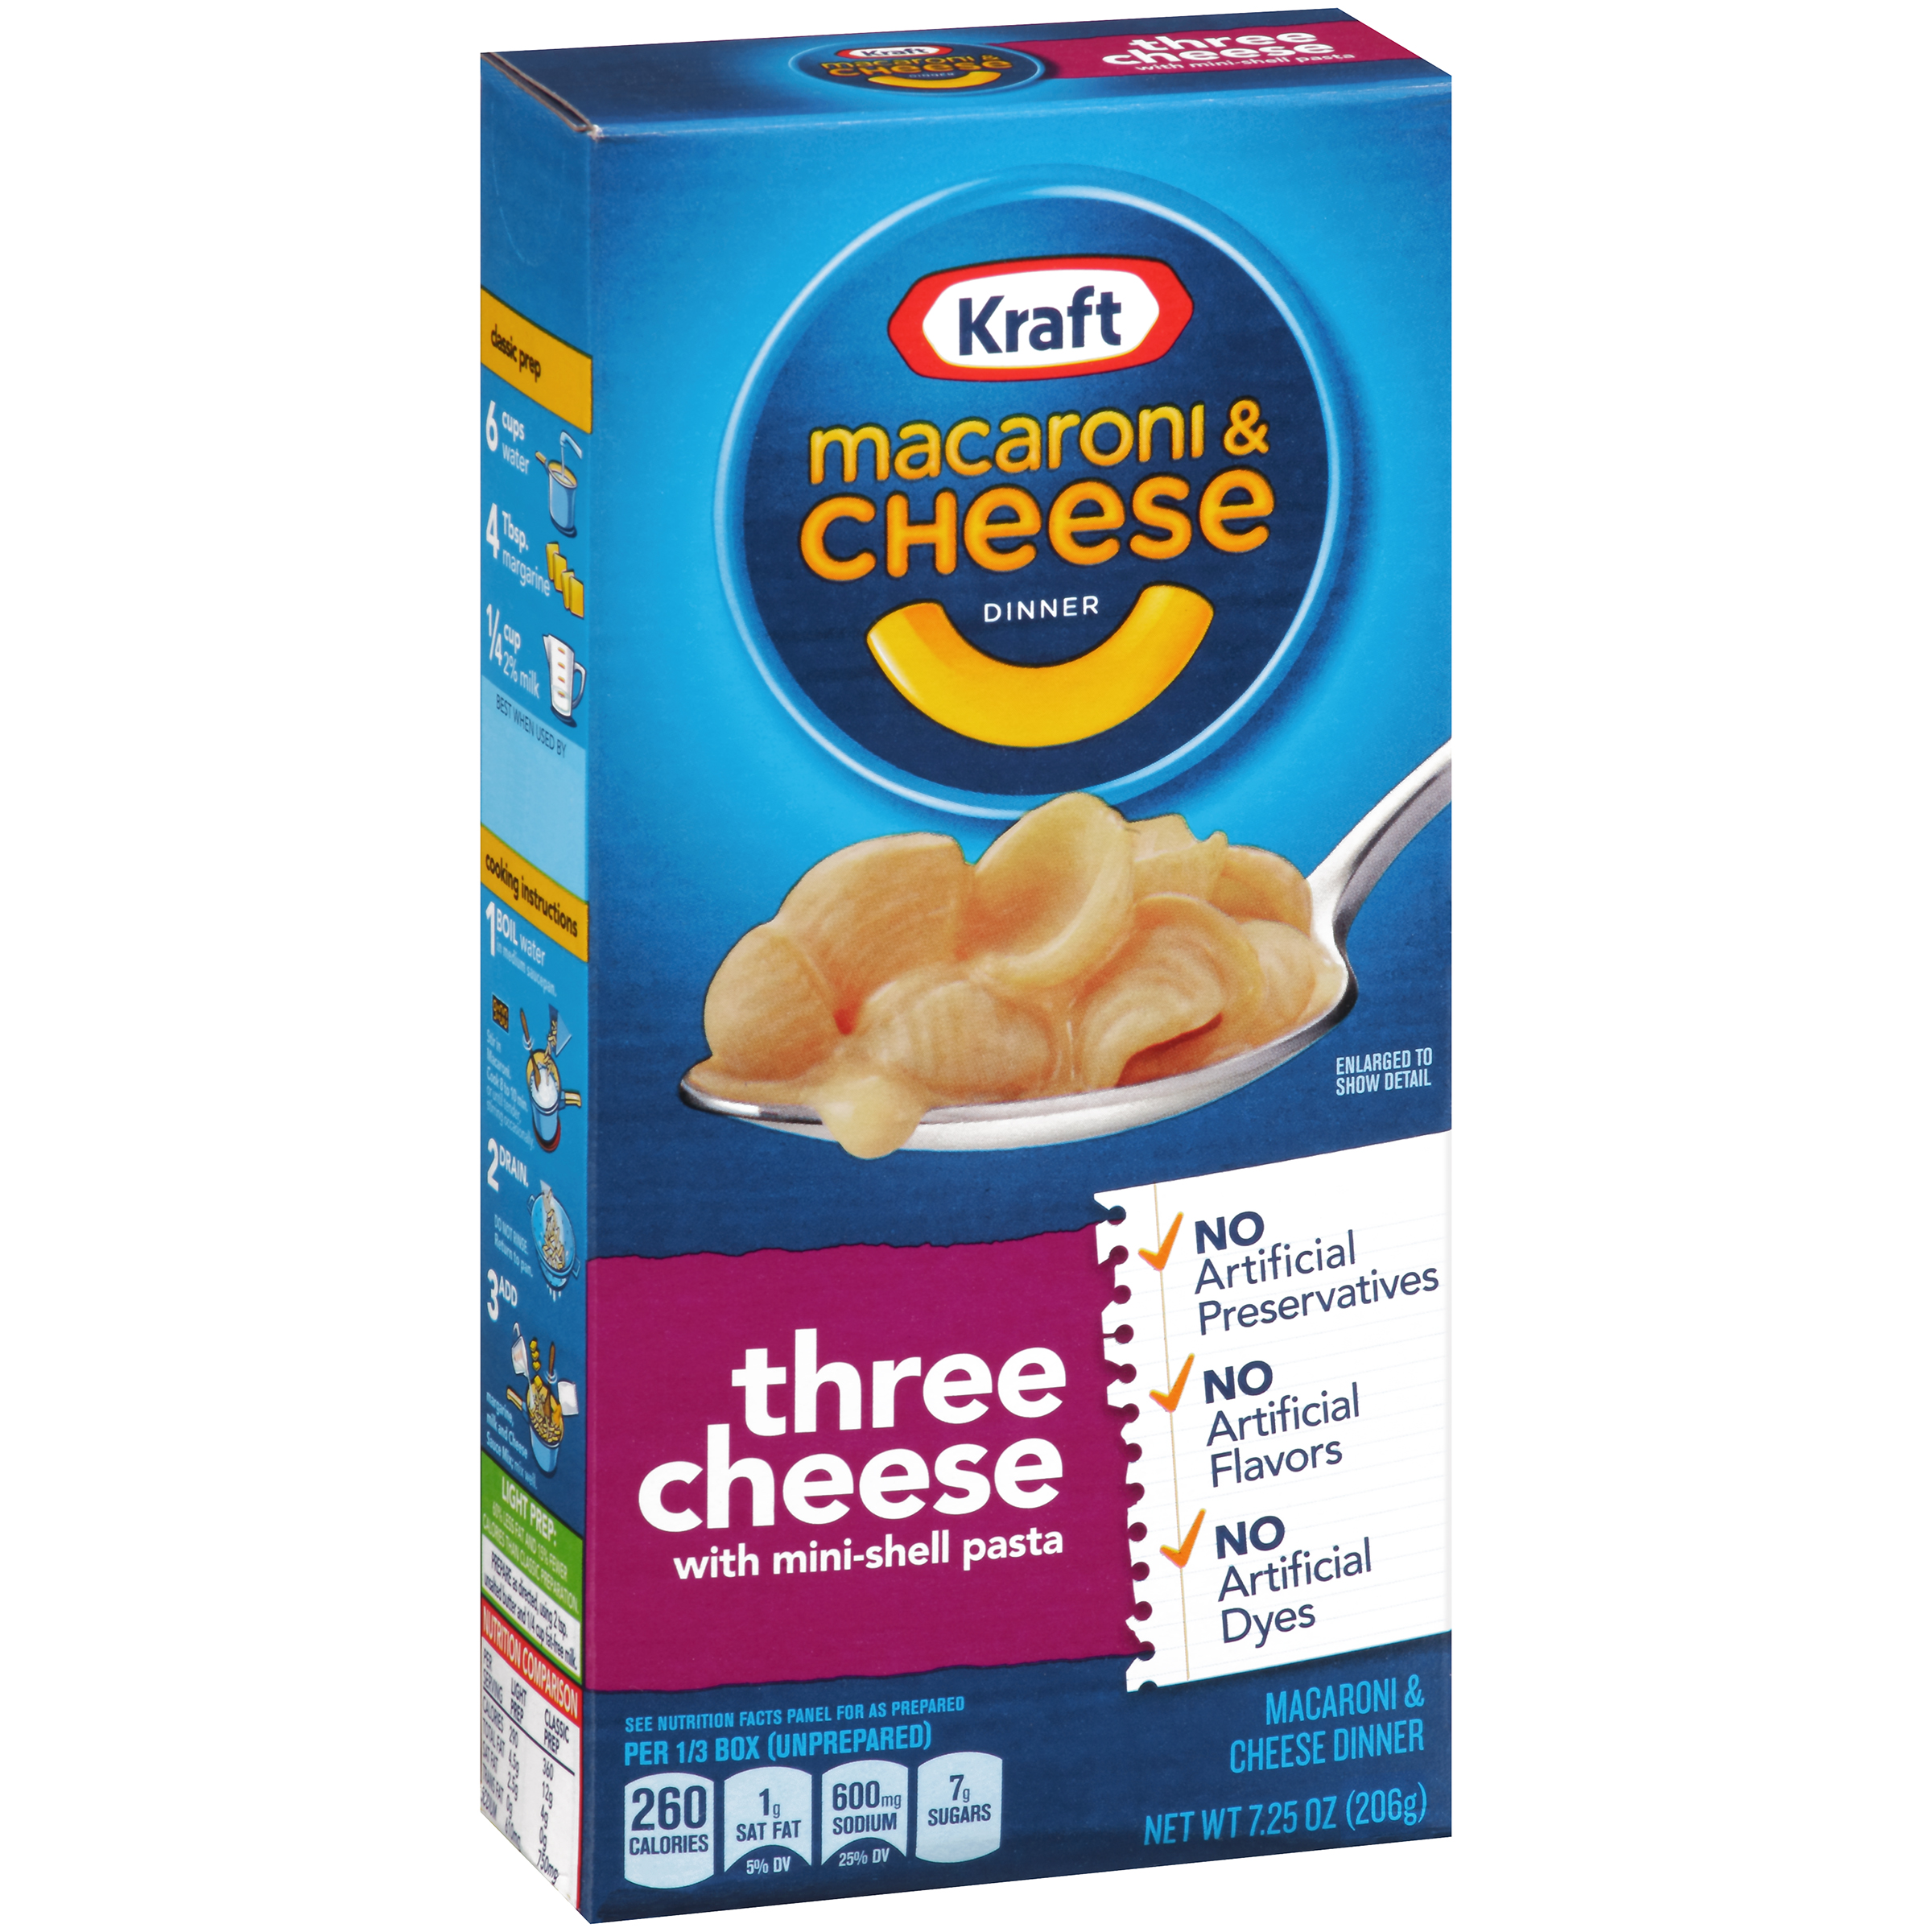 instant pot kraft macaroni and cheese